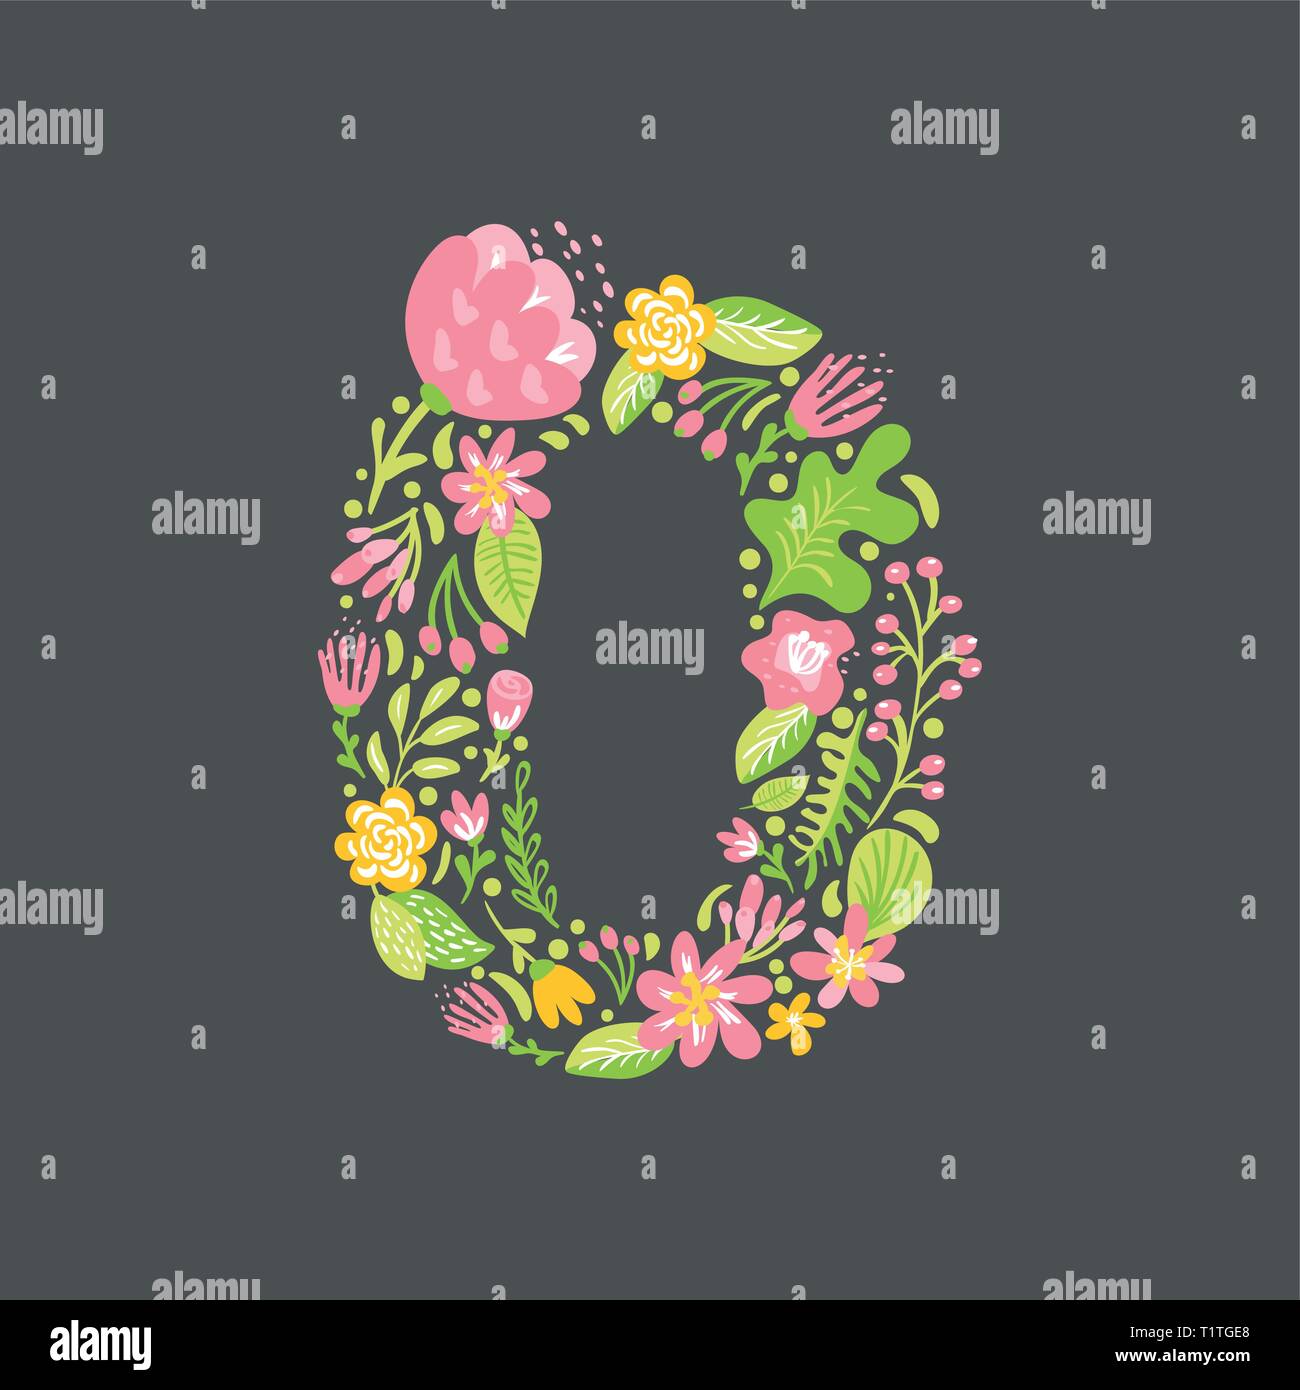 Floral summer Number 0 zero. Flower Capital wedding Uppercase Alphabet. Colorful font with flowers and leaves. Vector illustration scandinavian style. Stock Vector